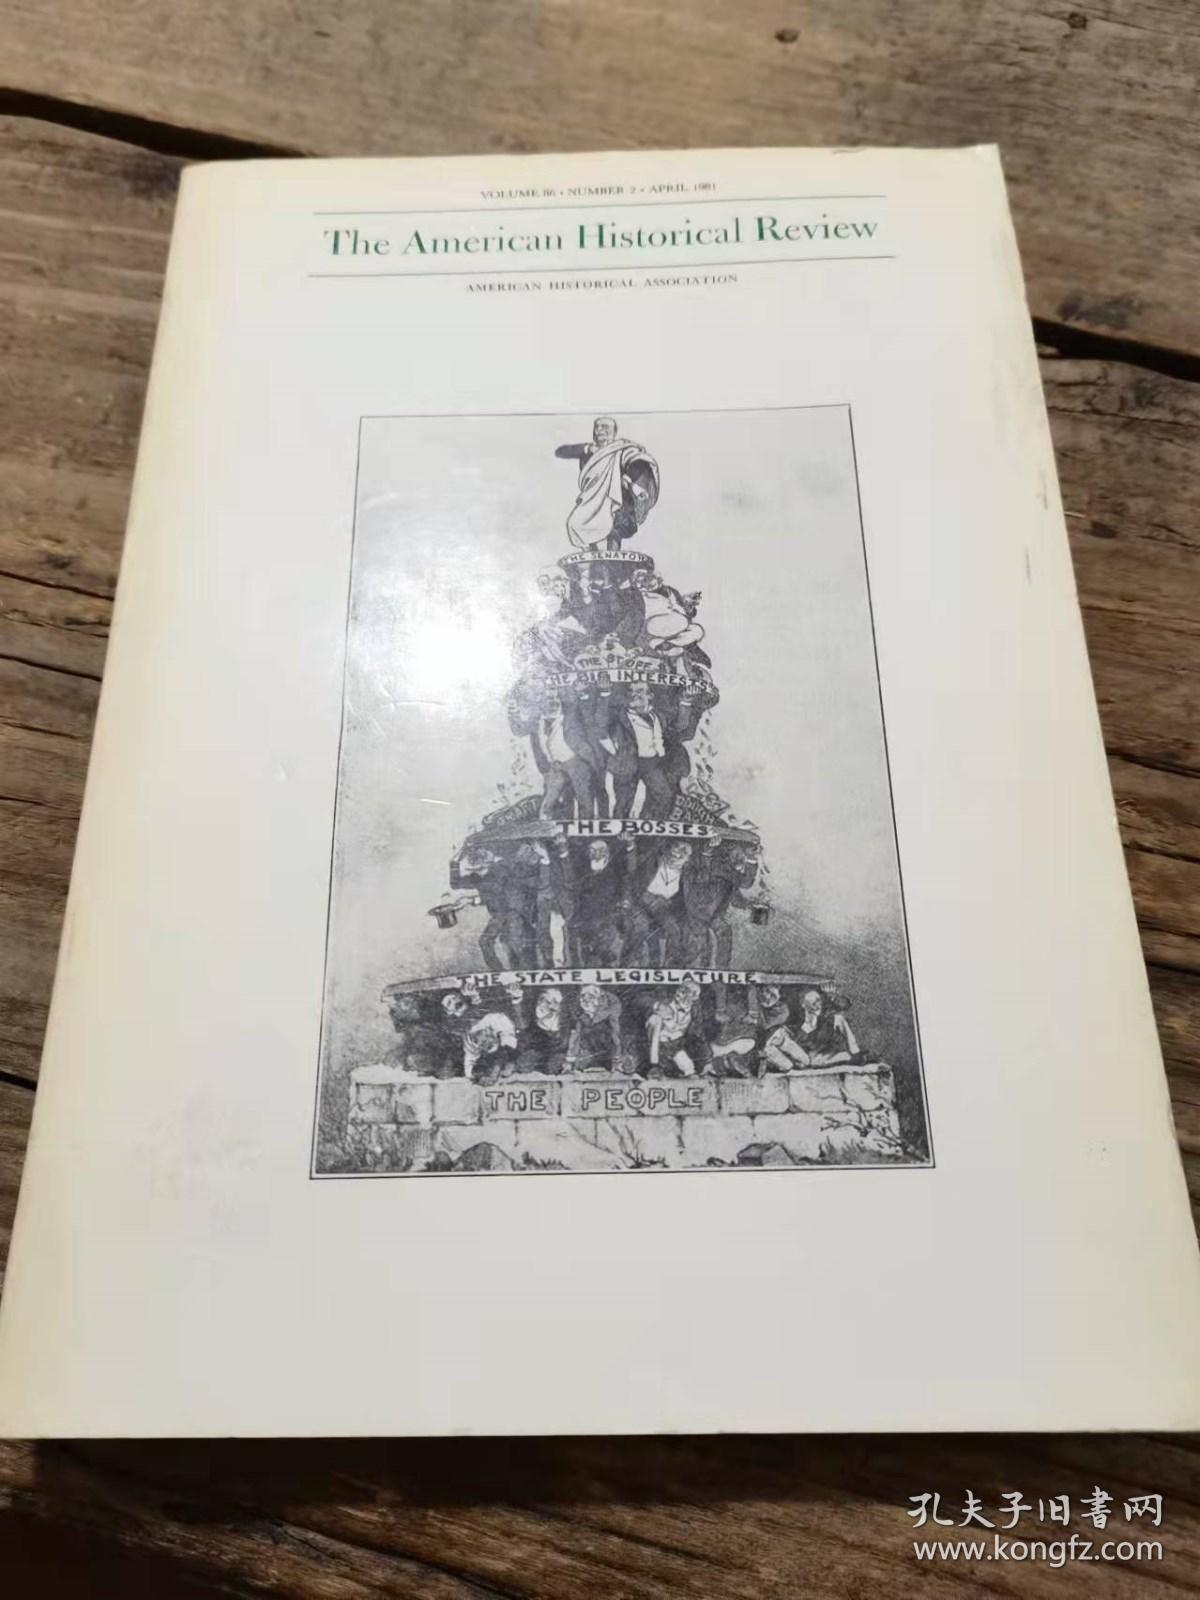 《THE AMERICAN HISTORICAL REVIEW》 APRIL 1981